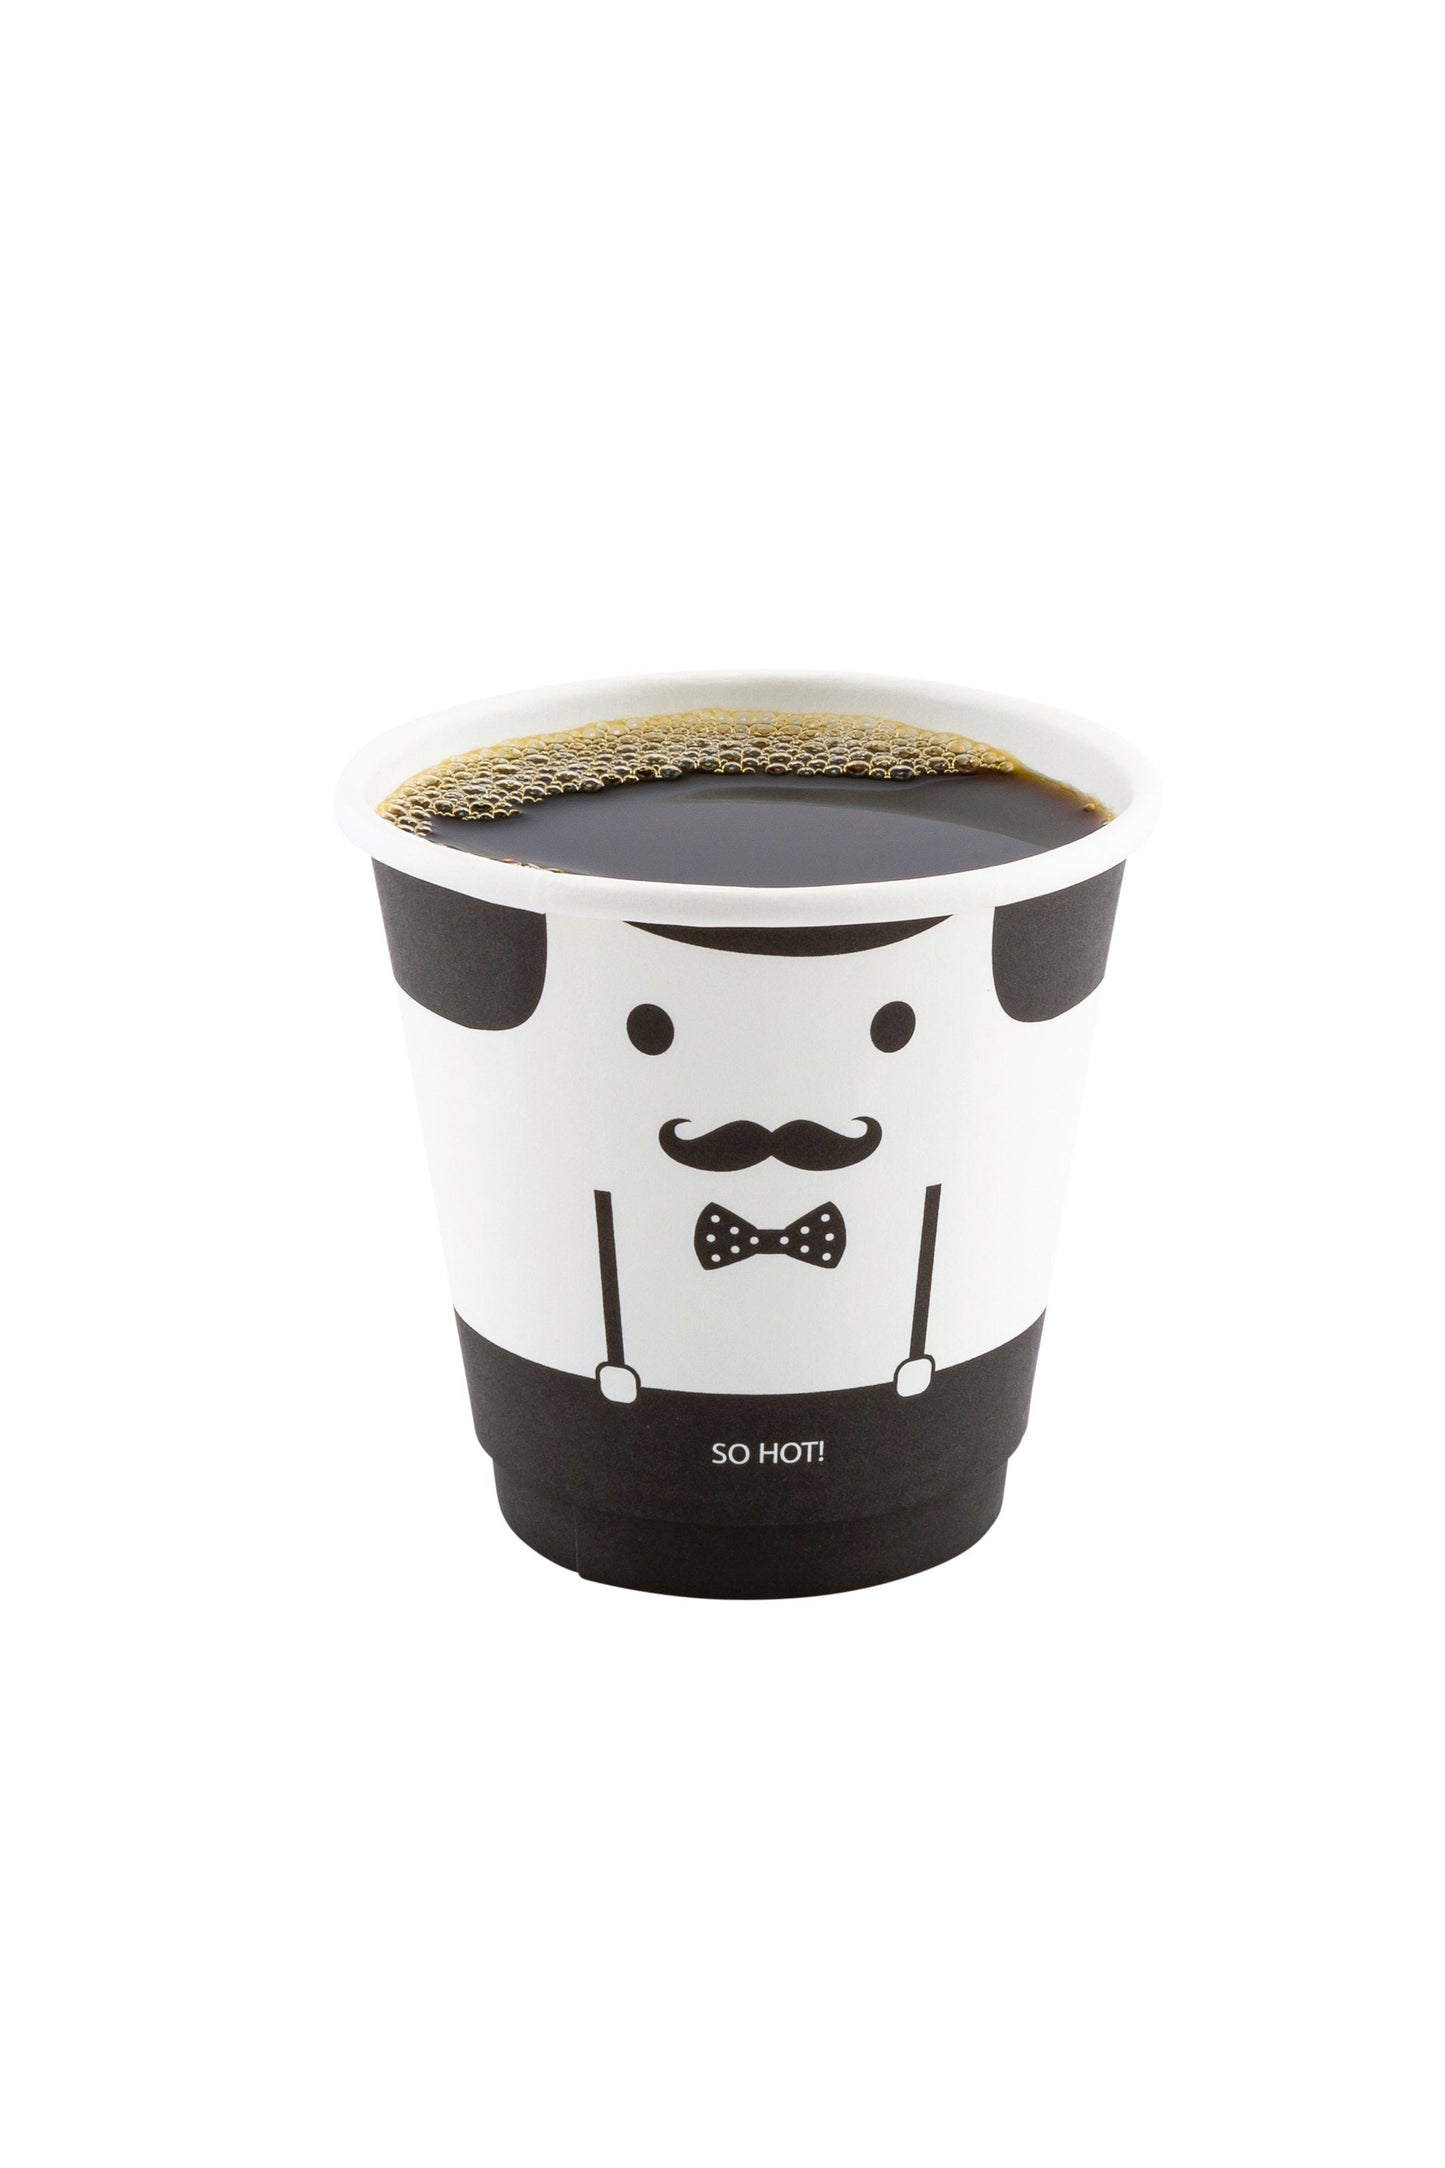 8 oz Monsieur Paper Coffee Cup - Double Wall - 3 1/2" x 3 1/2" x 3 1/4" - 500 count boxwww.ecoware.ae                               